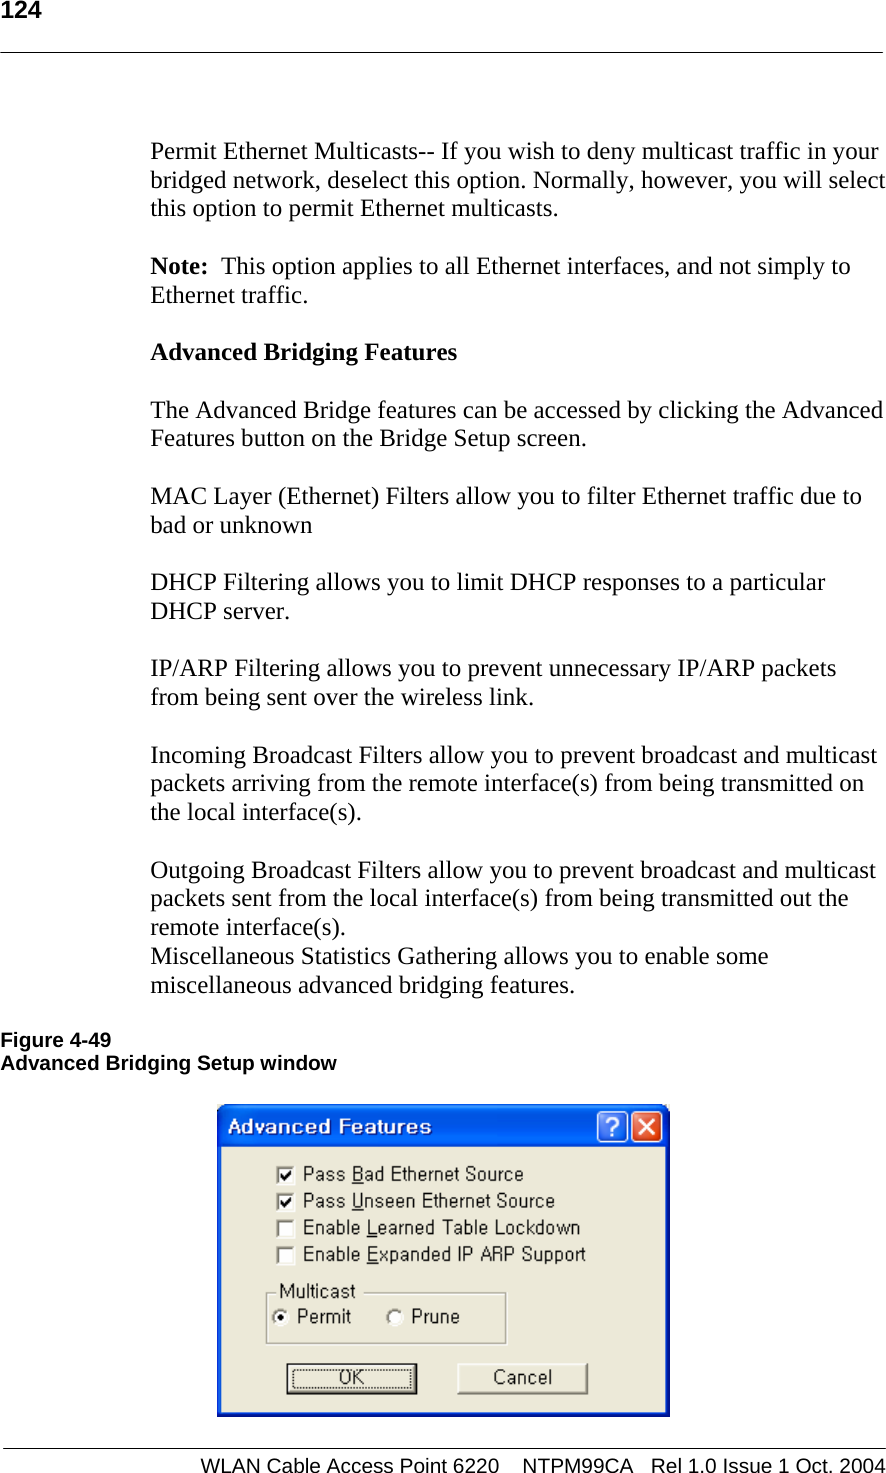   124    Permit Ethernet Multicasts-- If you wish to deny multicast traffic in your bridged network, deselect this option. Normally, however, you will select this option to permit Ethernet multicasts.  Note:  This option applies to all Ethernet interfaces, and not simply to Ethernet traffic.    Advanced Bridging Features   The Advanced Bridge features can be accessed by clicking the Advanced Features button on the Bridge Setup screen.  MAC Layer (Ethernet) Filters allow you to filter Ethernet traffic due to bad or unknown   DHCP Filtering allows you to limit DHCP responses to a particular DHCP server.   IP/ARP Filtering allows you to prevent unnecessary IP/ARP packets from being sent over the wireless link.  Incoming Broadcast Filters allow you to prevent broadcast and multicast packets arriving from the remote interface(s) from being transmitted on the local interface(s).  Outgoing Broadcast Filters allow you to prevent broadcast and multicast packets sent from the local interface(s) from being transmitted out the remote interface(s). Miscellaneous Statistics Gathering allows you to enable some miscellaneous advanced bridging features.  Figure 4-49 Advanced Bridging Setup window    WLAN Cable Access Point 6220    NTPM99CA   Rel 1.0 Issue 1 Oct. 2004